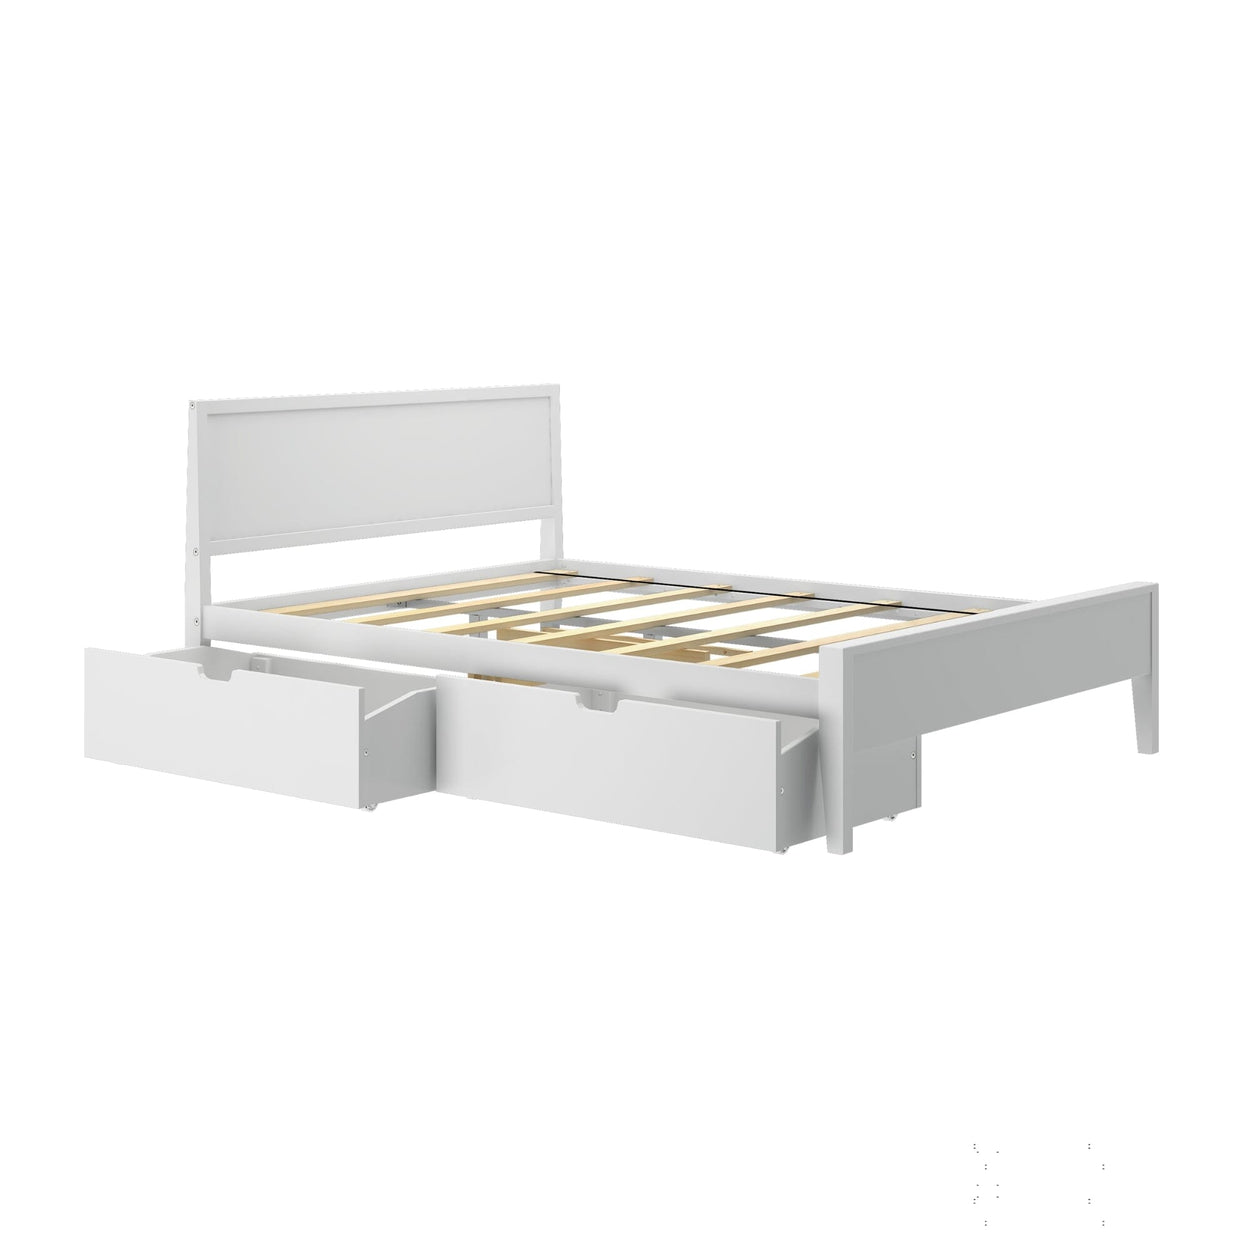 187102-002 : Kids Beds Classic Queen-Size Bed with Panel Headboard and Storage Drawers, White